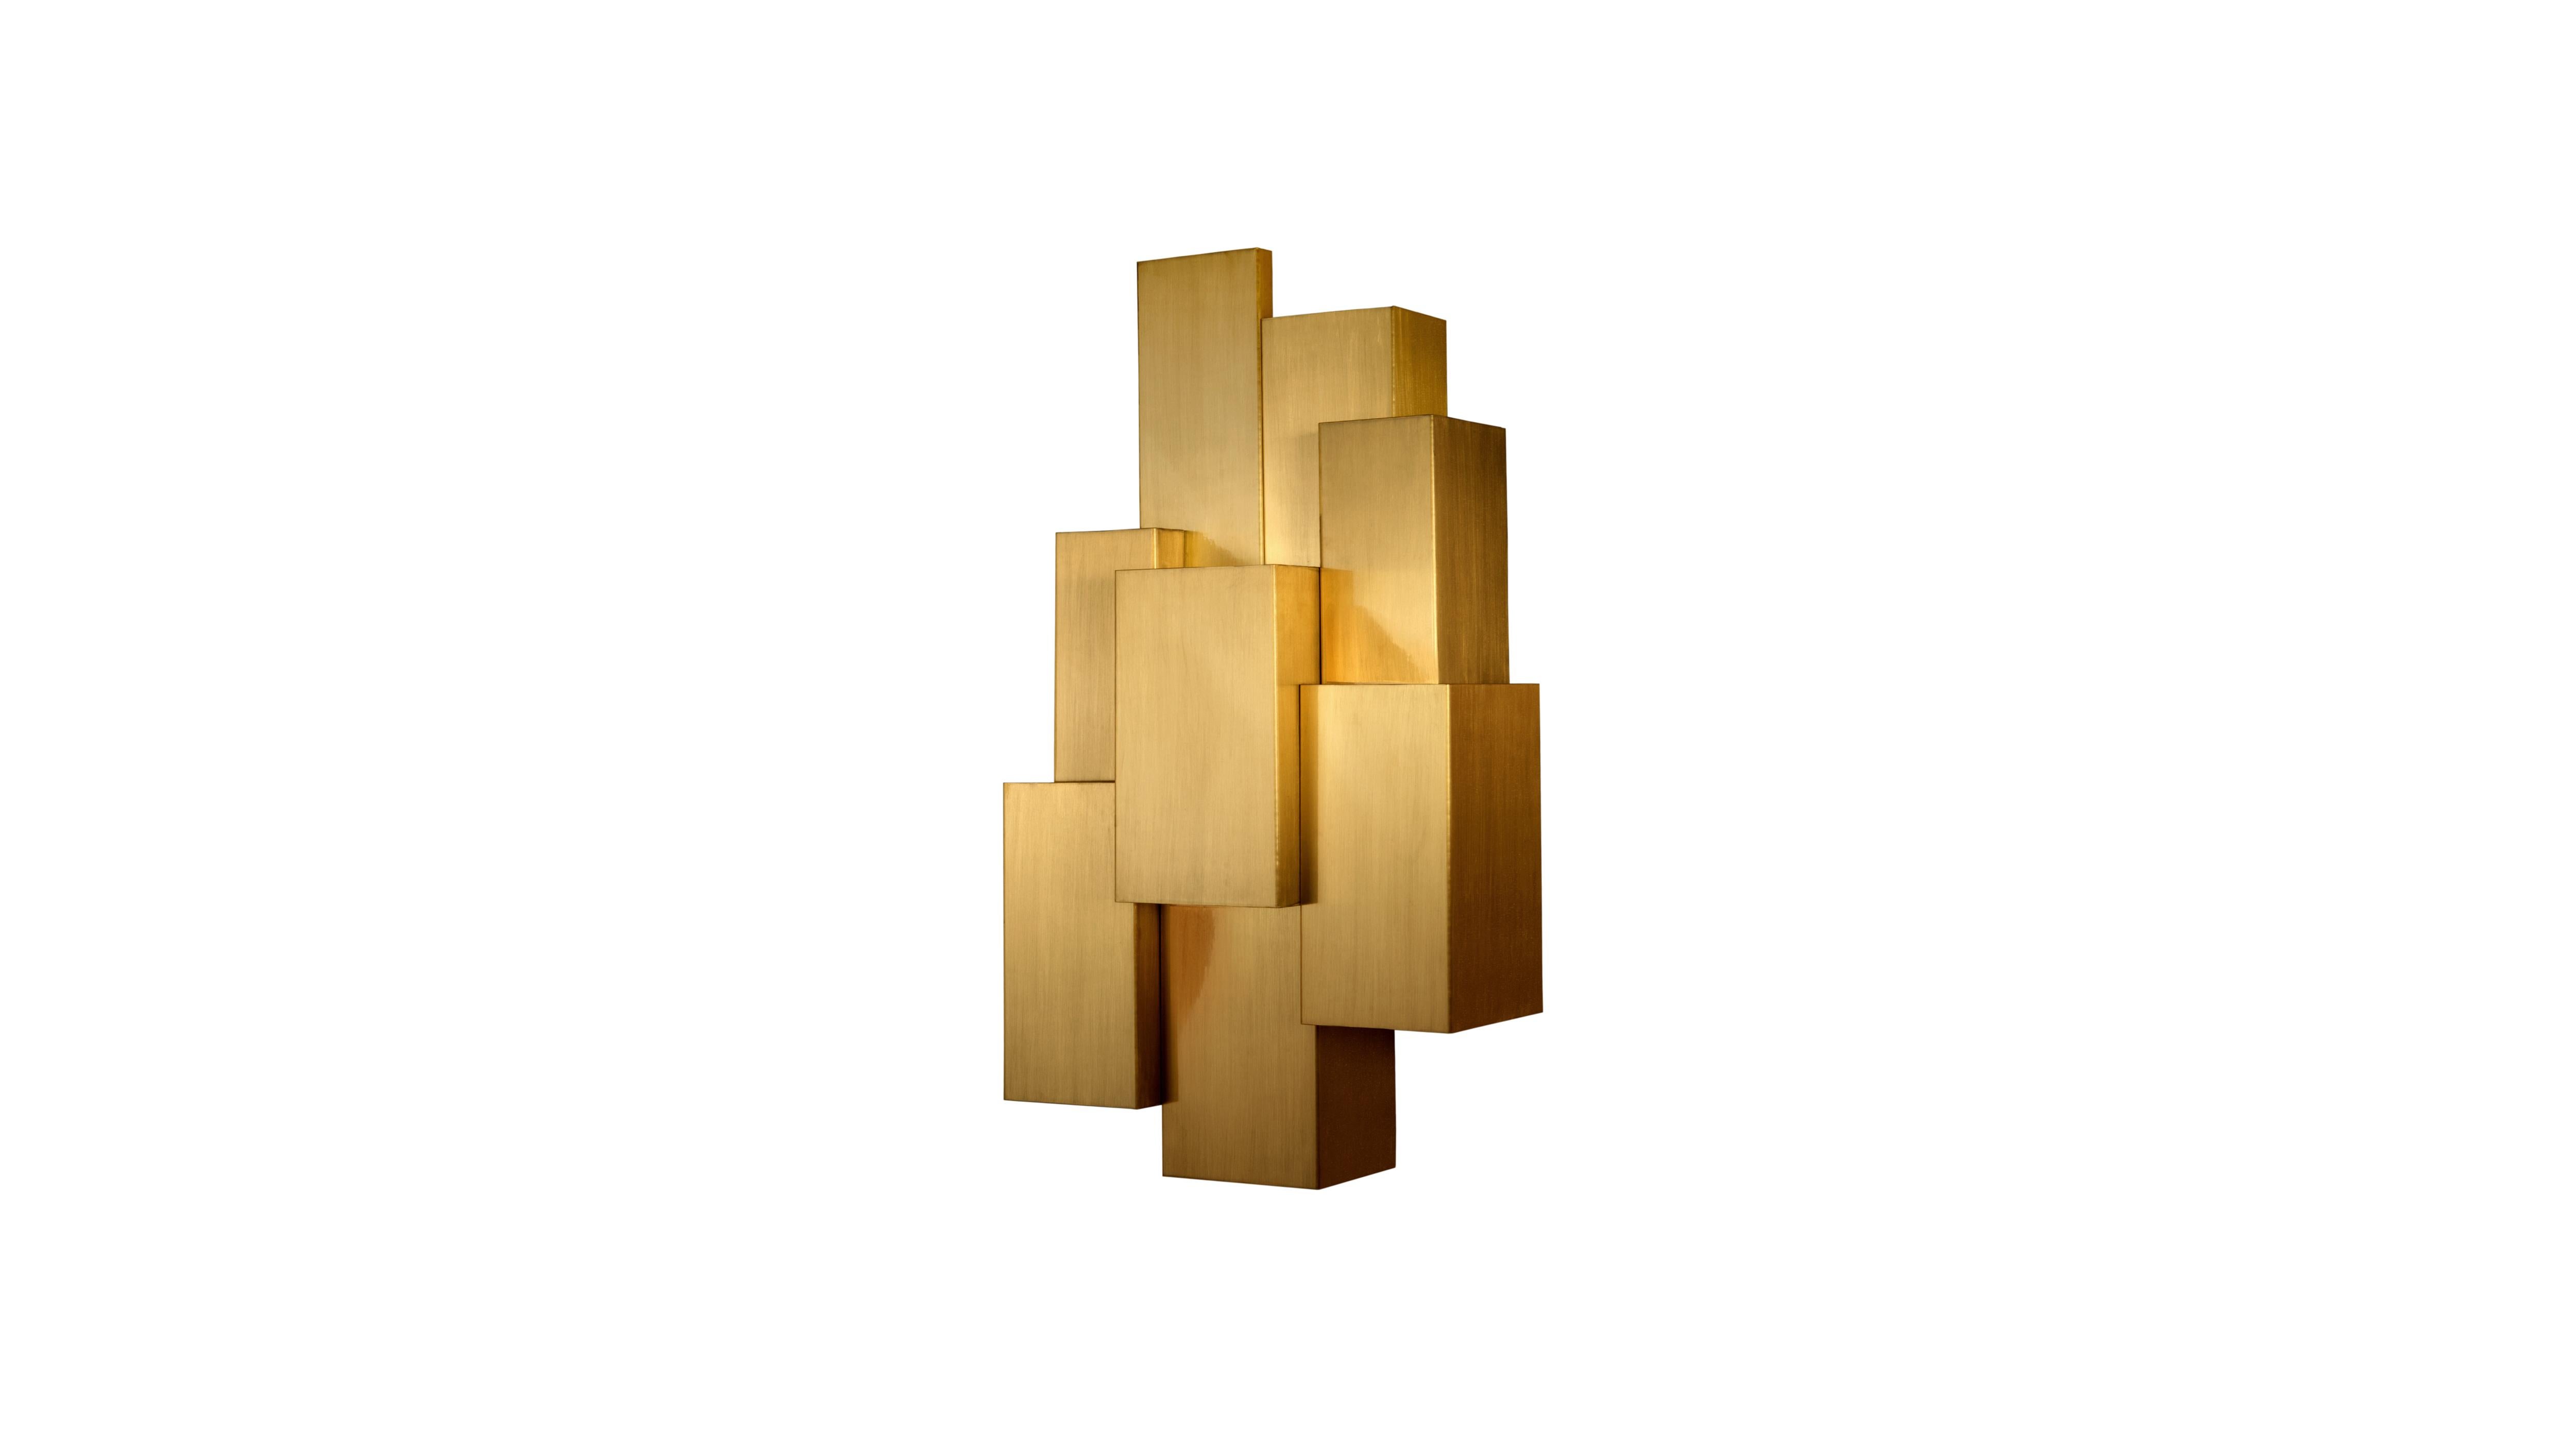 Large Inspiring Trees Brushed Brass Wall Lamp by InsidherLand
Dimensions: D 18 x W 33 x H 60 cm.
Materials: Brushed brass.
3 kg.
Available in other metals.

Inspiring Trees is the essence of a personal fascination. Slender, geometric and seemingly